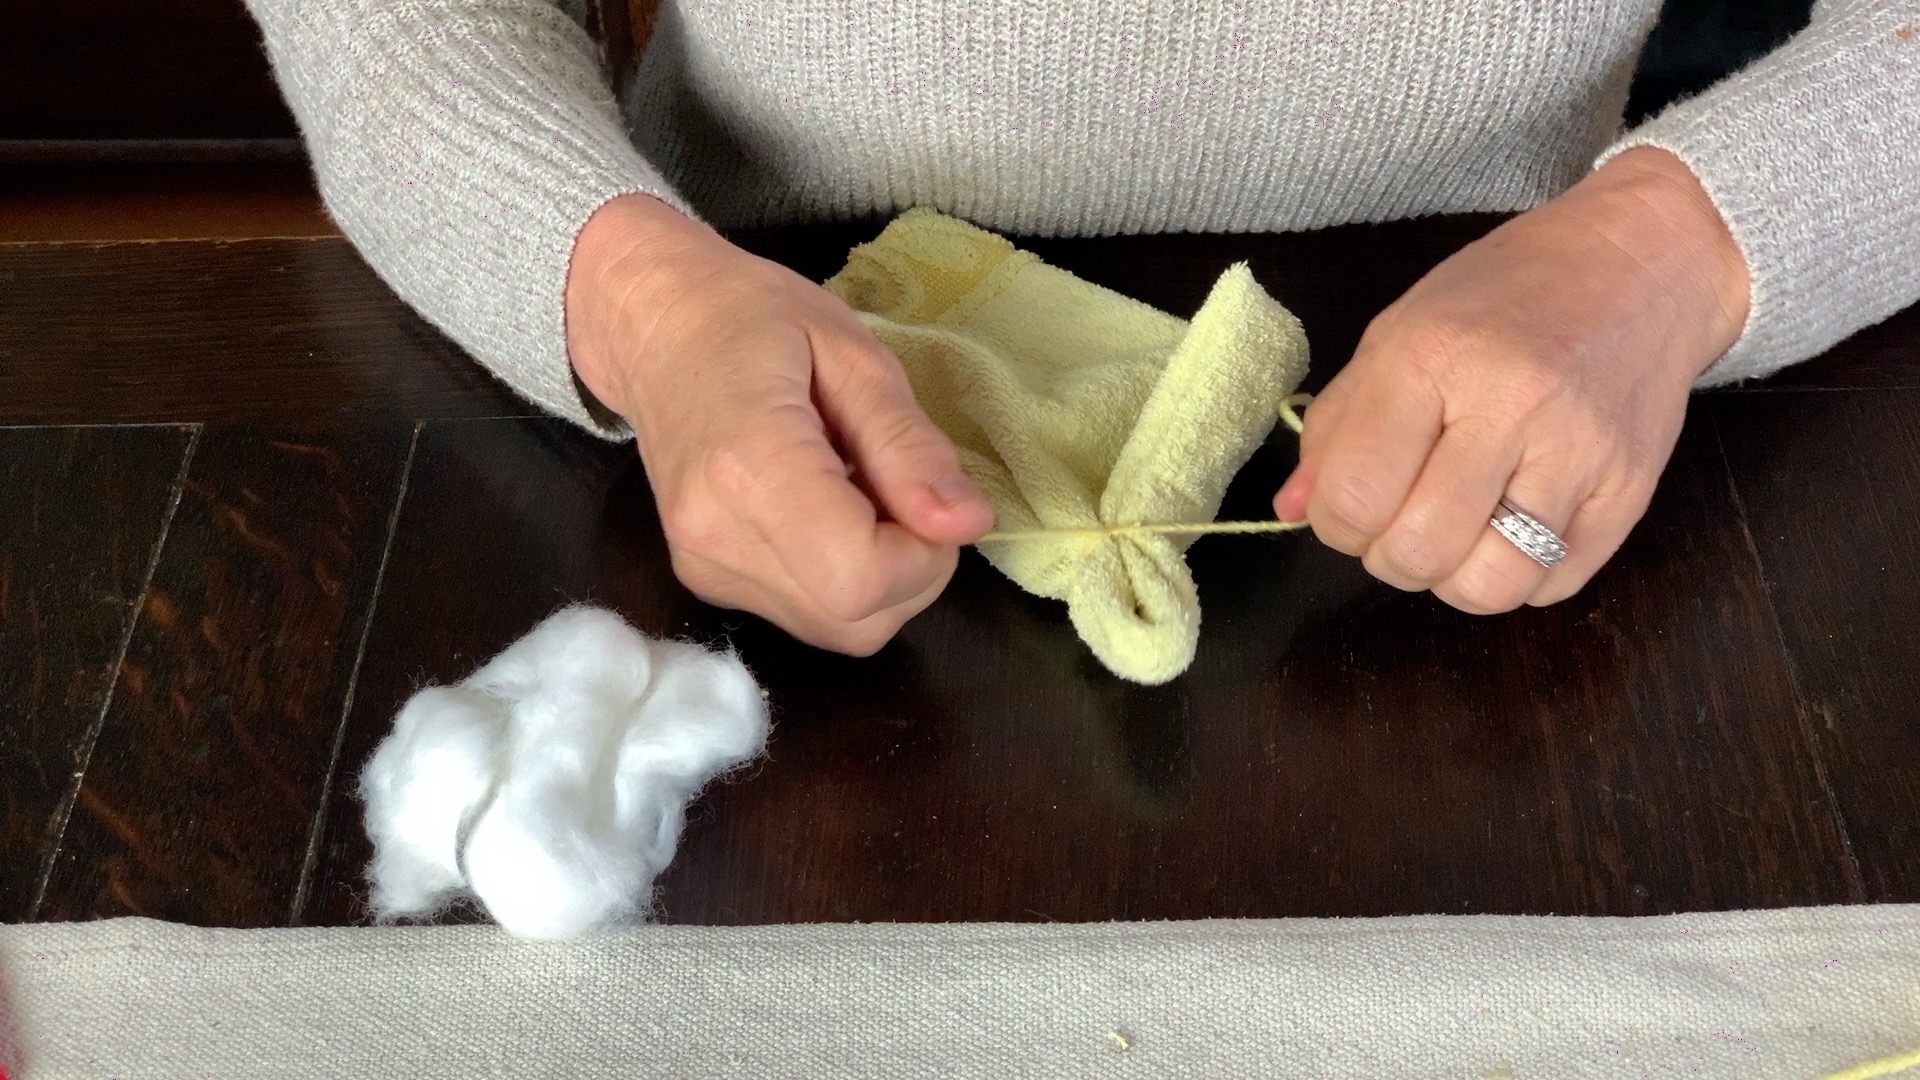 shaping the ear of the washcloth bunny